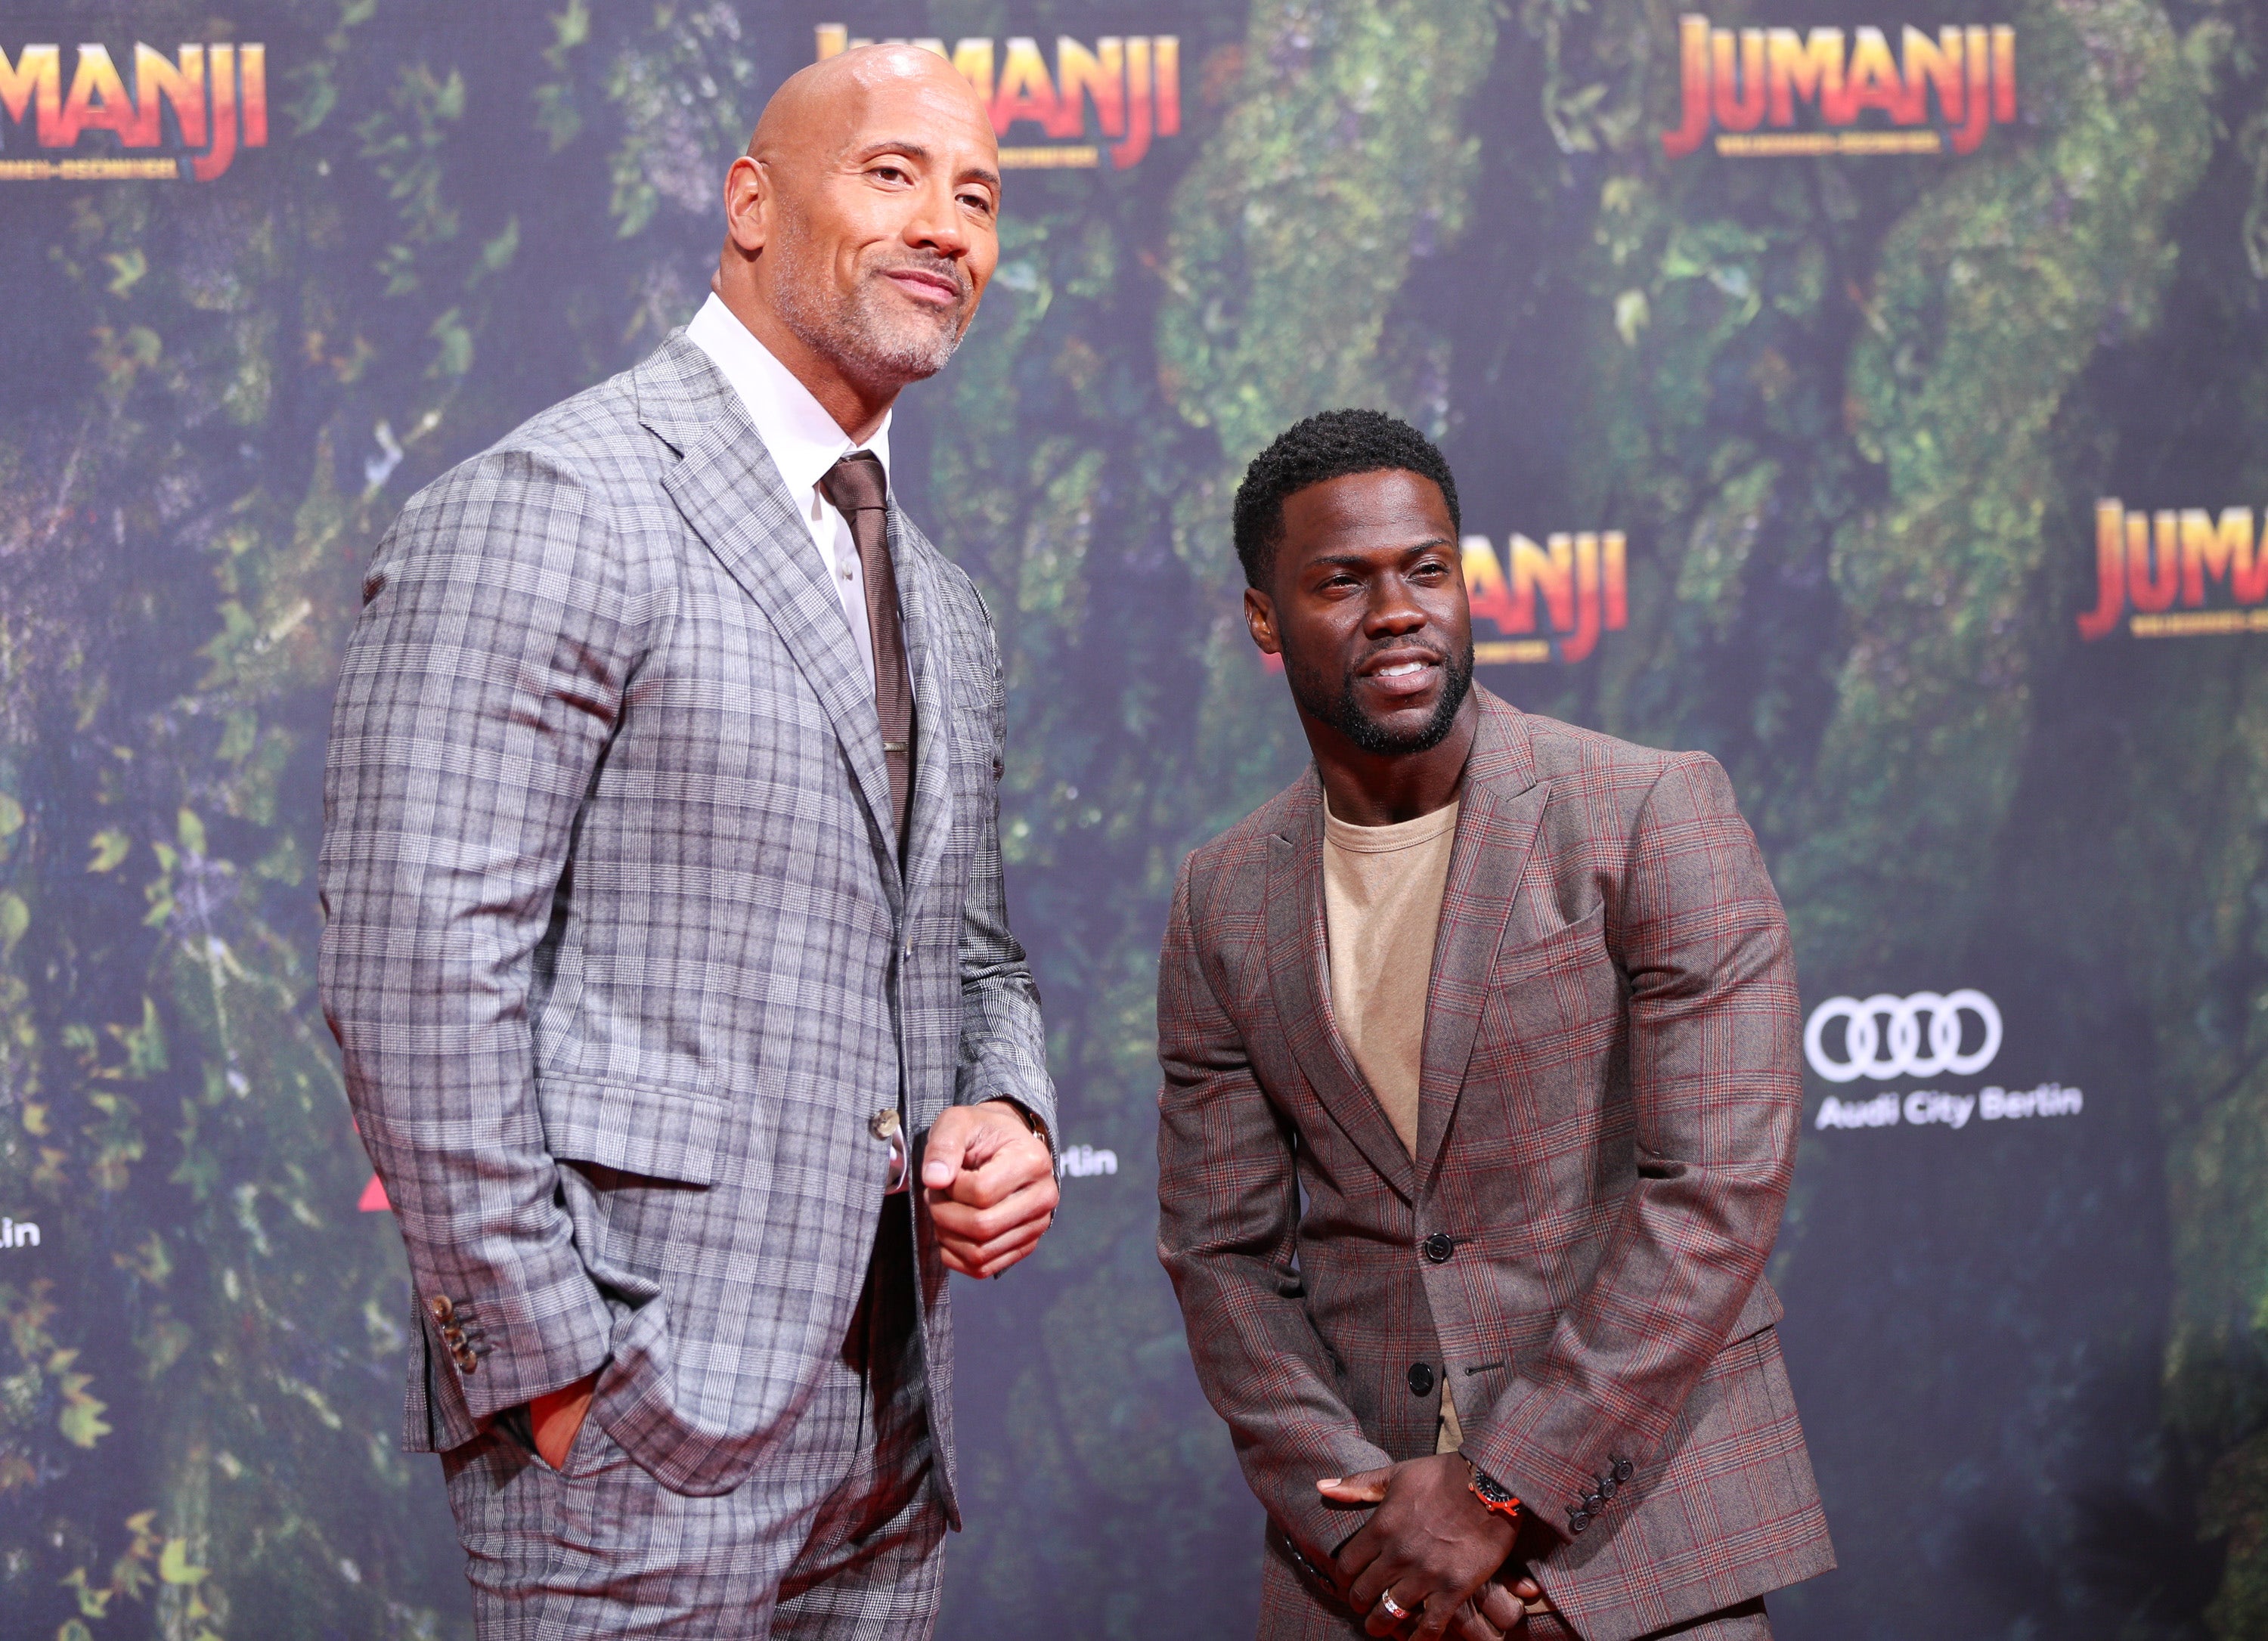 Kevin Hart gets support from Dwayne 'The Rock' Johnson, other celebrities after car accident